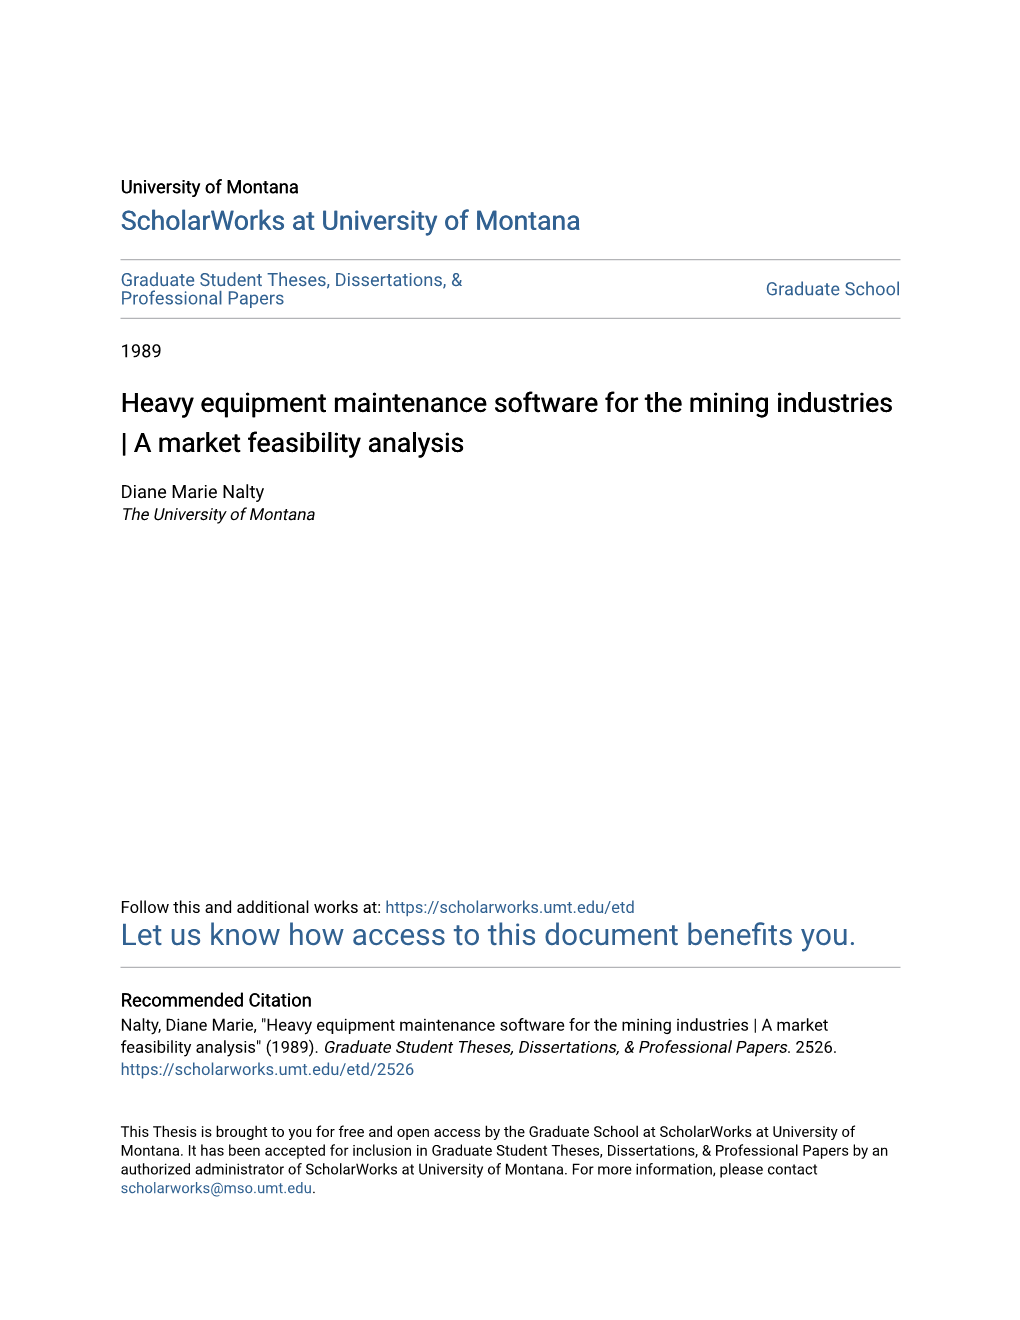 Heavy Equipment Maintenance Software for the Mining Industries | a Market Feasibility Analysis